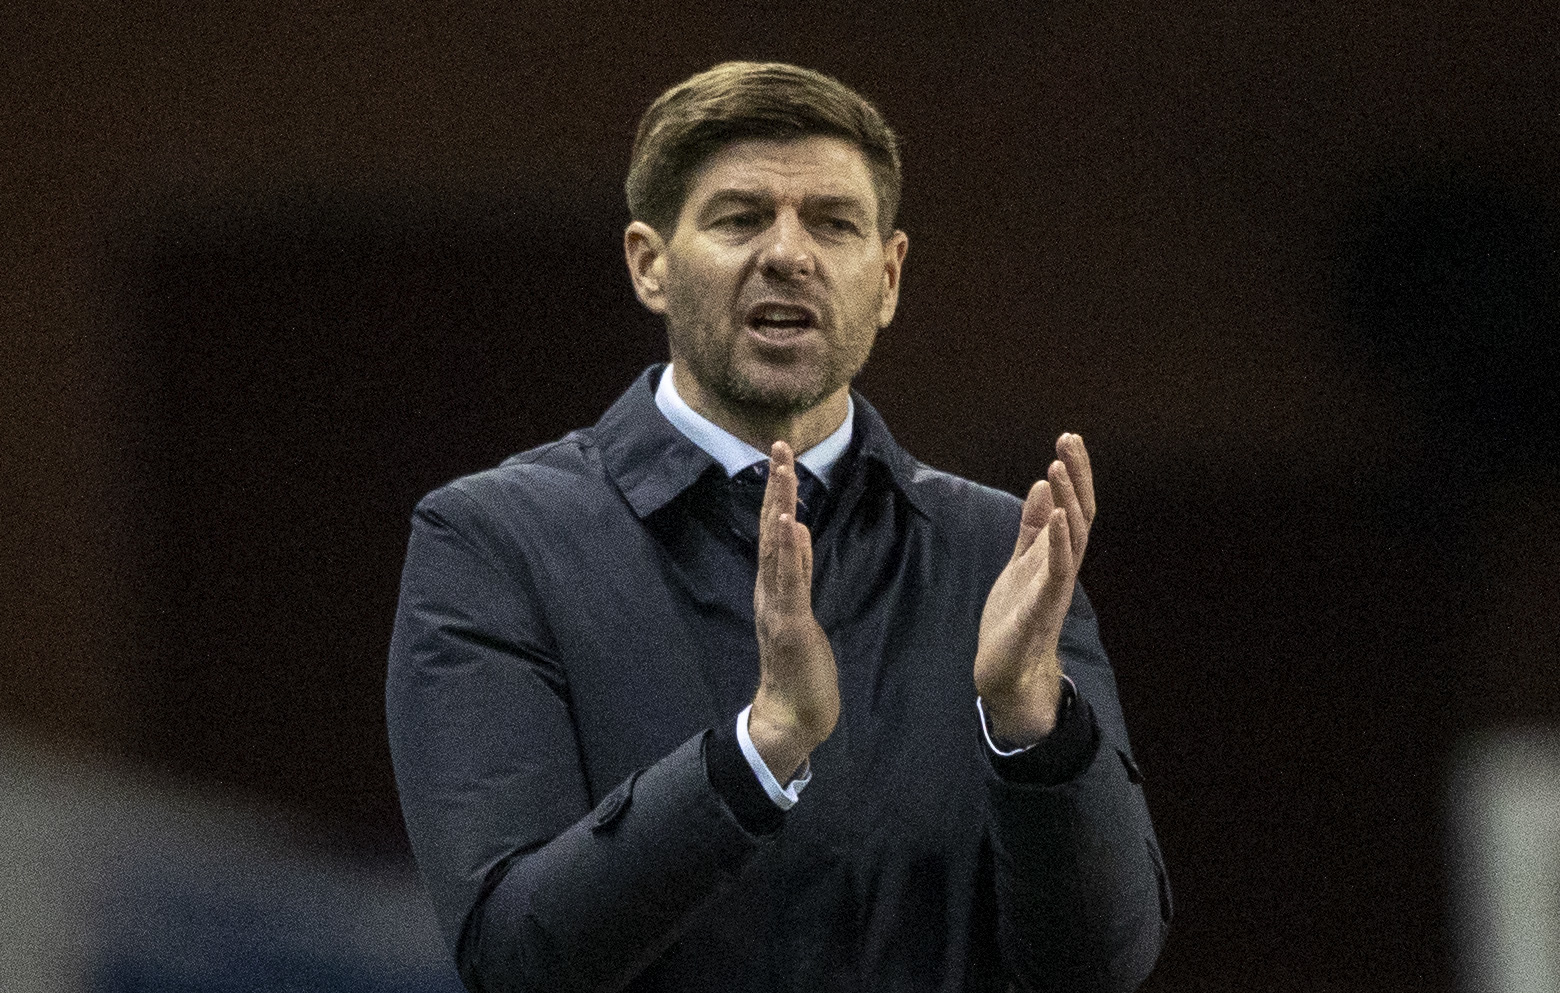 Rangers: Steven Gerrard's 'not ready' admission in wake of Champions League failure